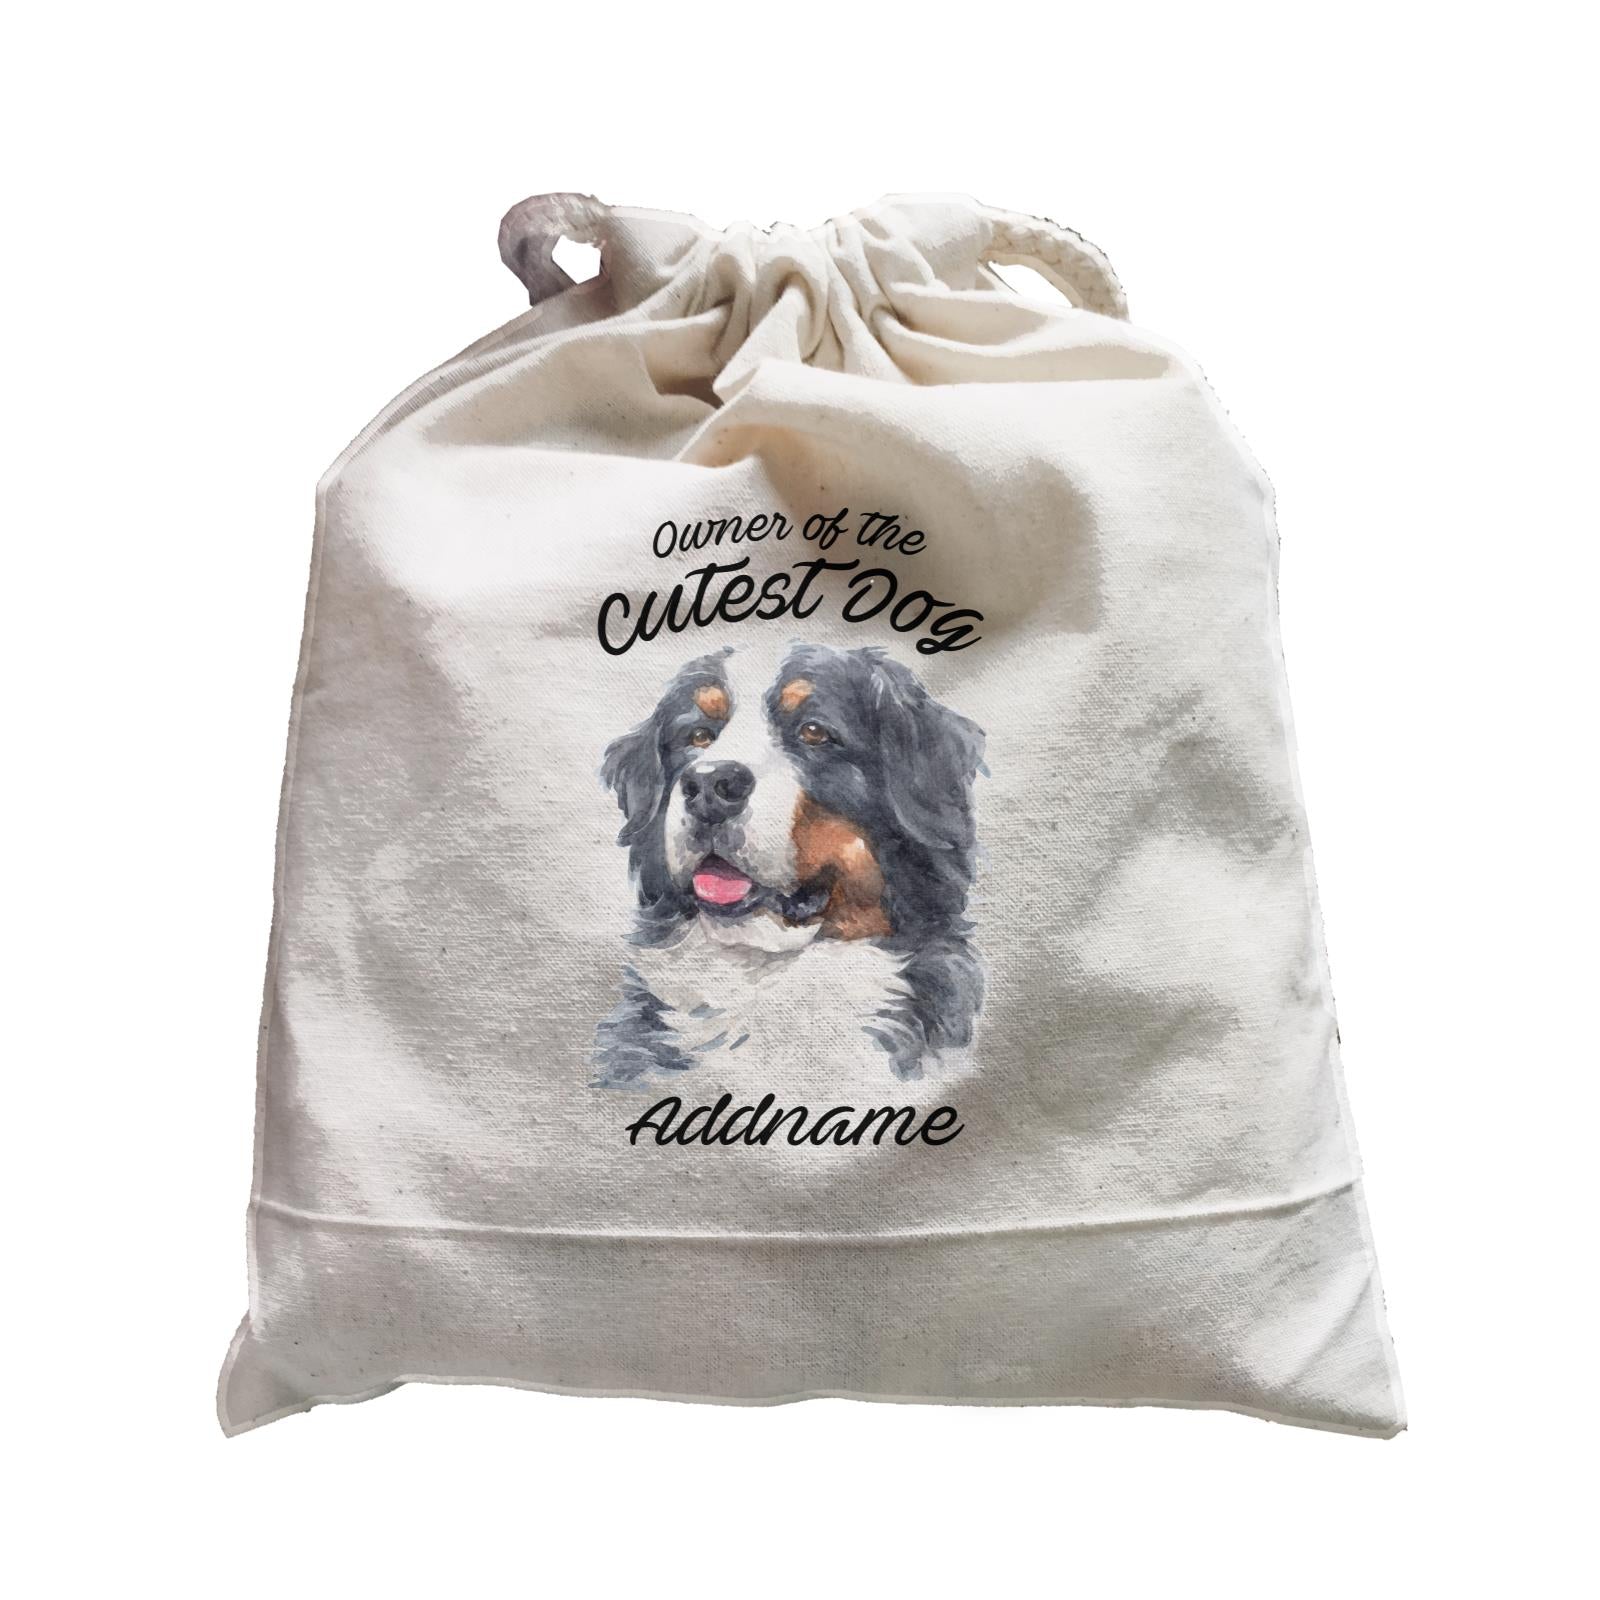 Watercolor Dog Owner Of The Cutest Dog Bernese Mountain Dog Addname Satchel